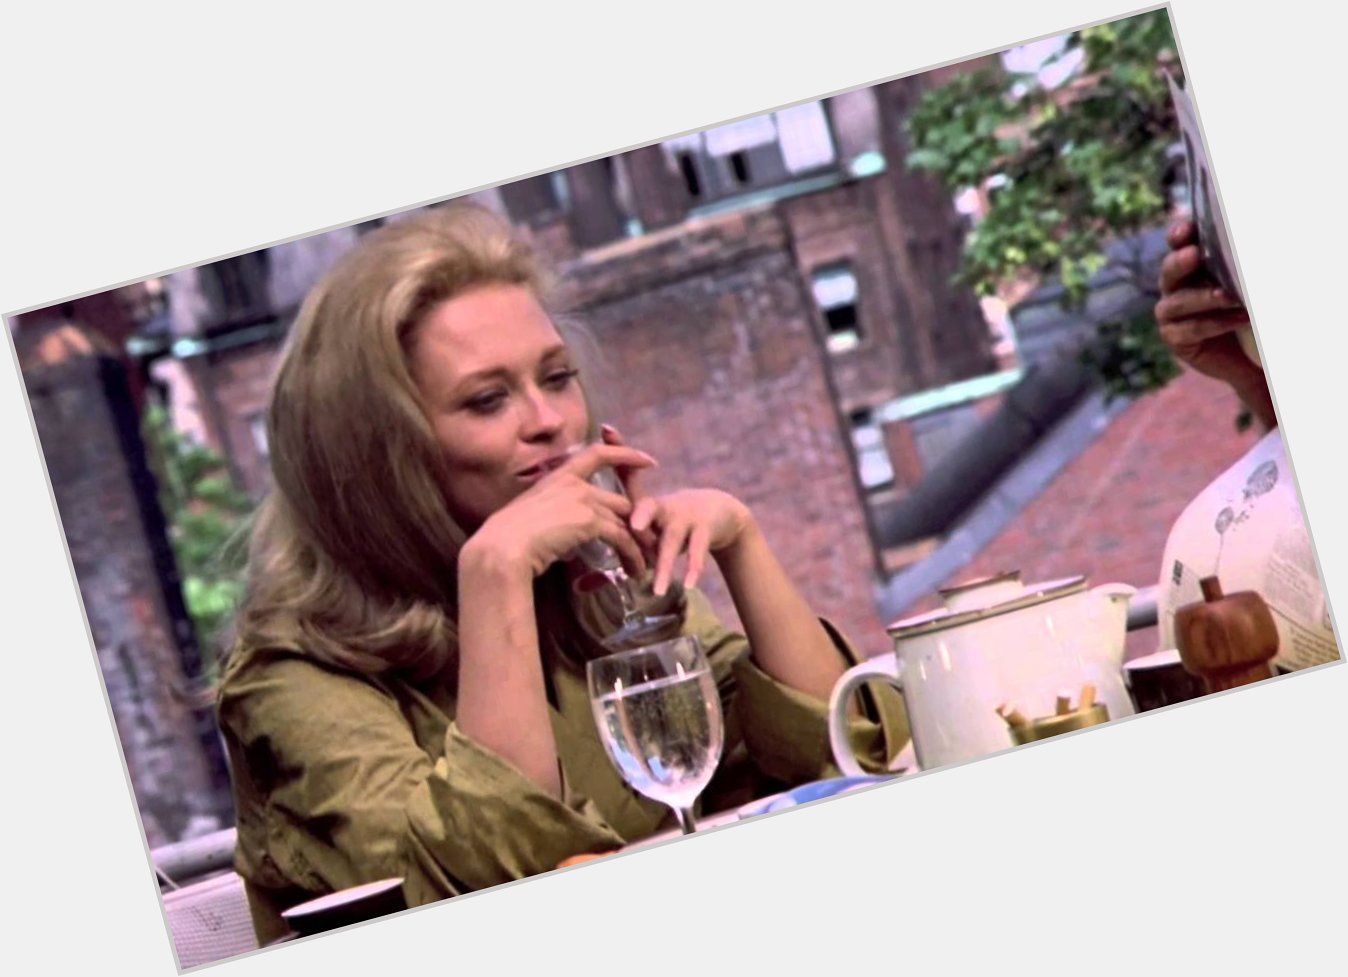 Happy birthday, Faye Dunaway! Here in the coolest movie ever made: The Thomas Crown Affair (1968). 